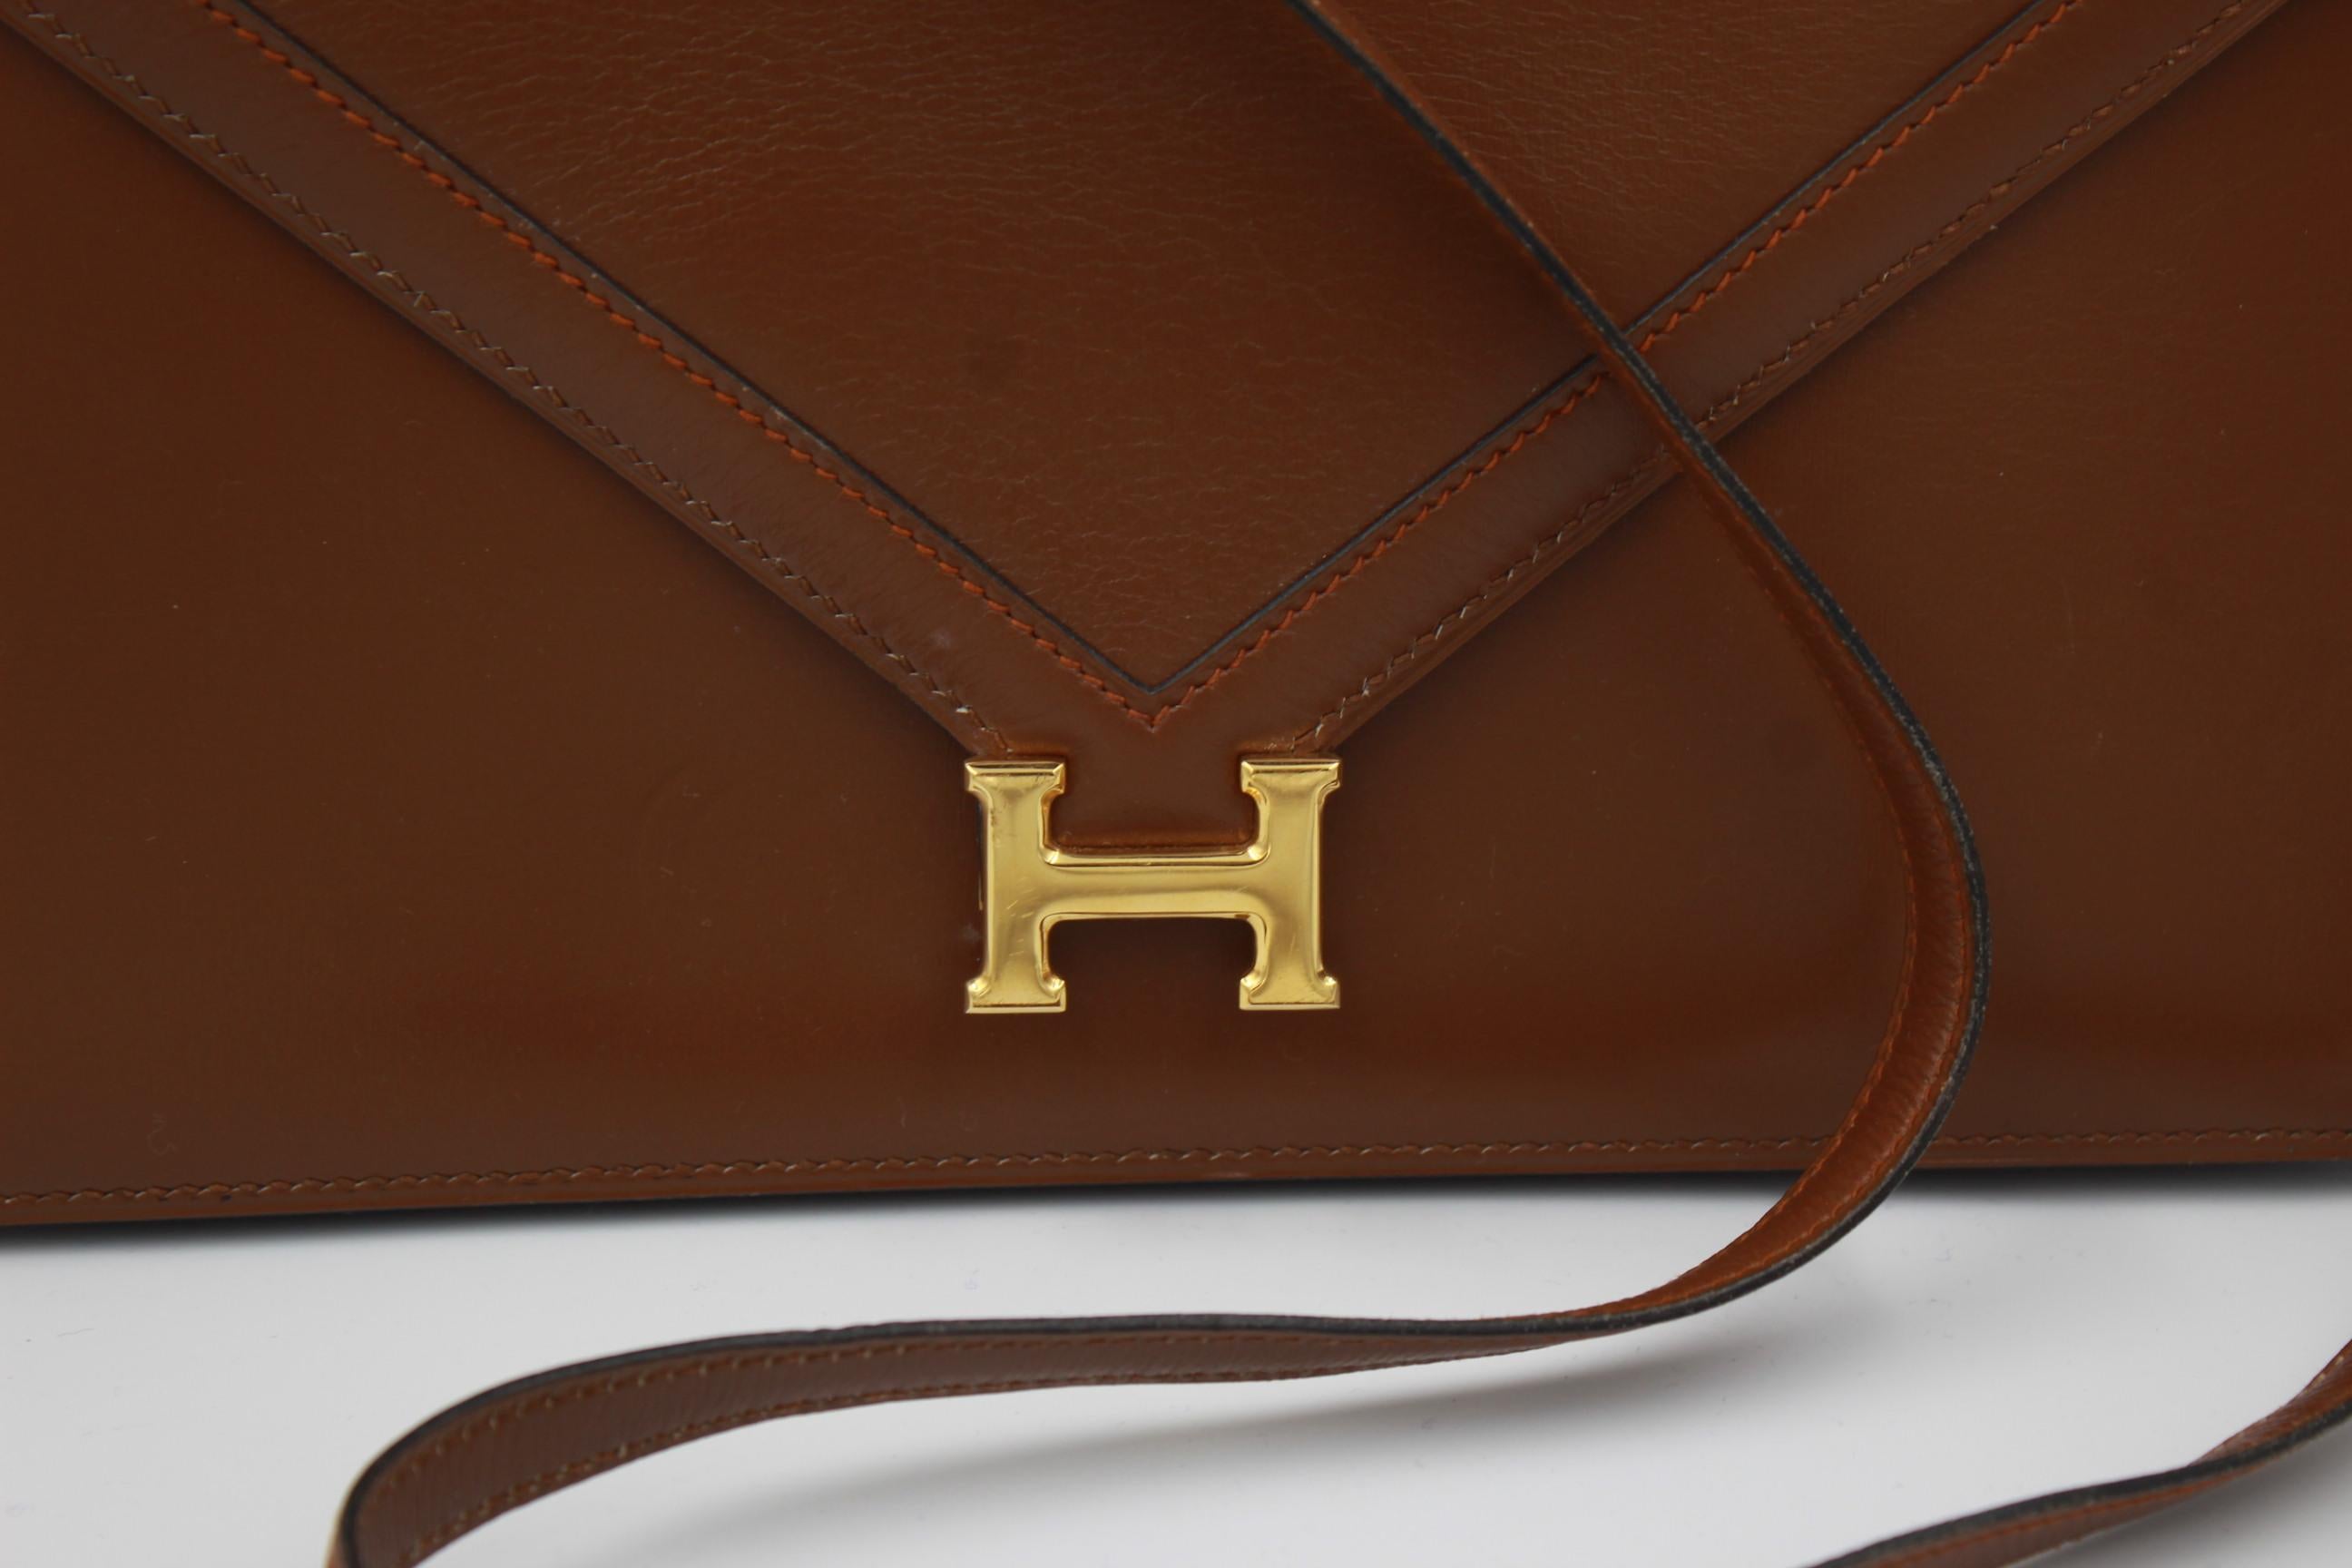 Vintage Hermes Lydie shoulder bag in brown box leather 

good vintage condition some light signs of wear.

Bag from 1985

Detachable strap 

Size 23x15

Interior in really good condition.